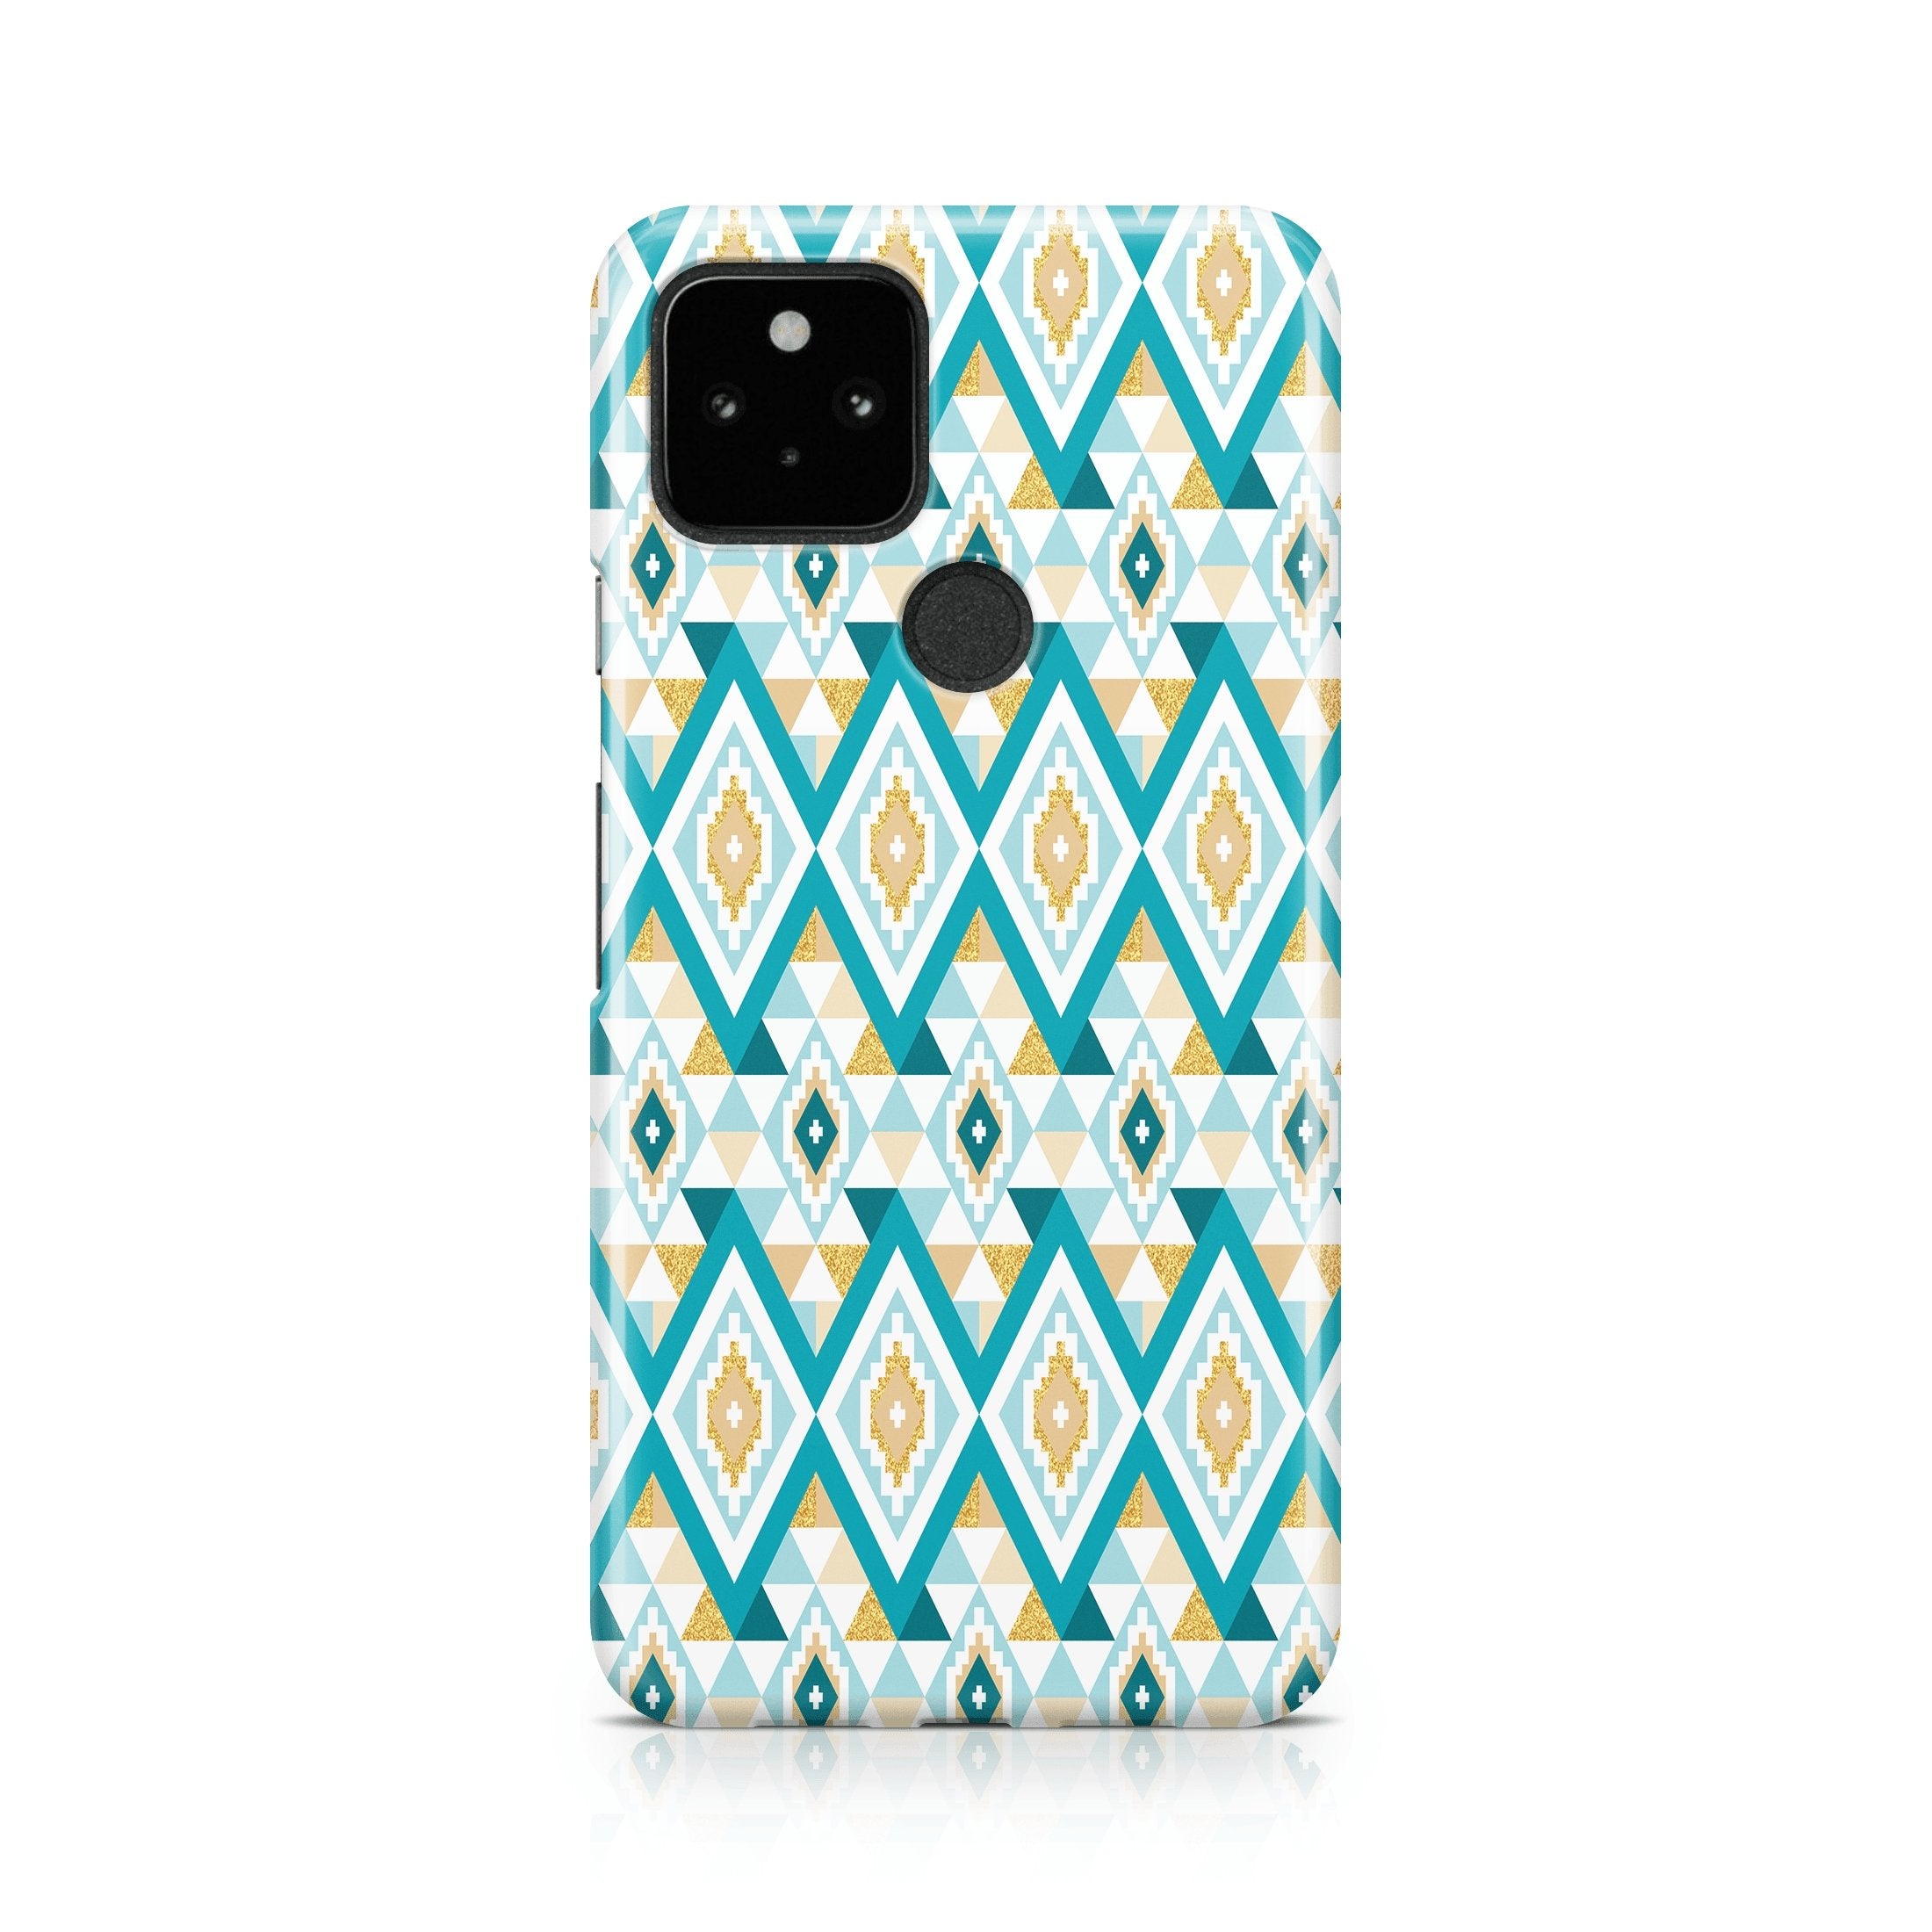 Gold & Teal Aztec II - Google phone case designs by CaseSwagger